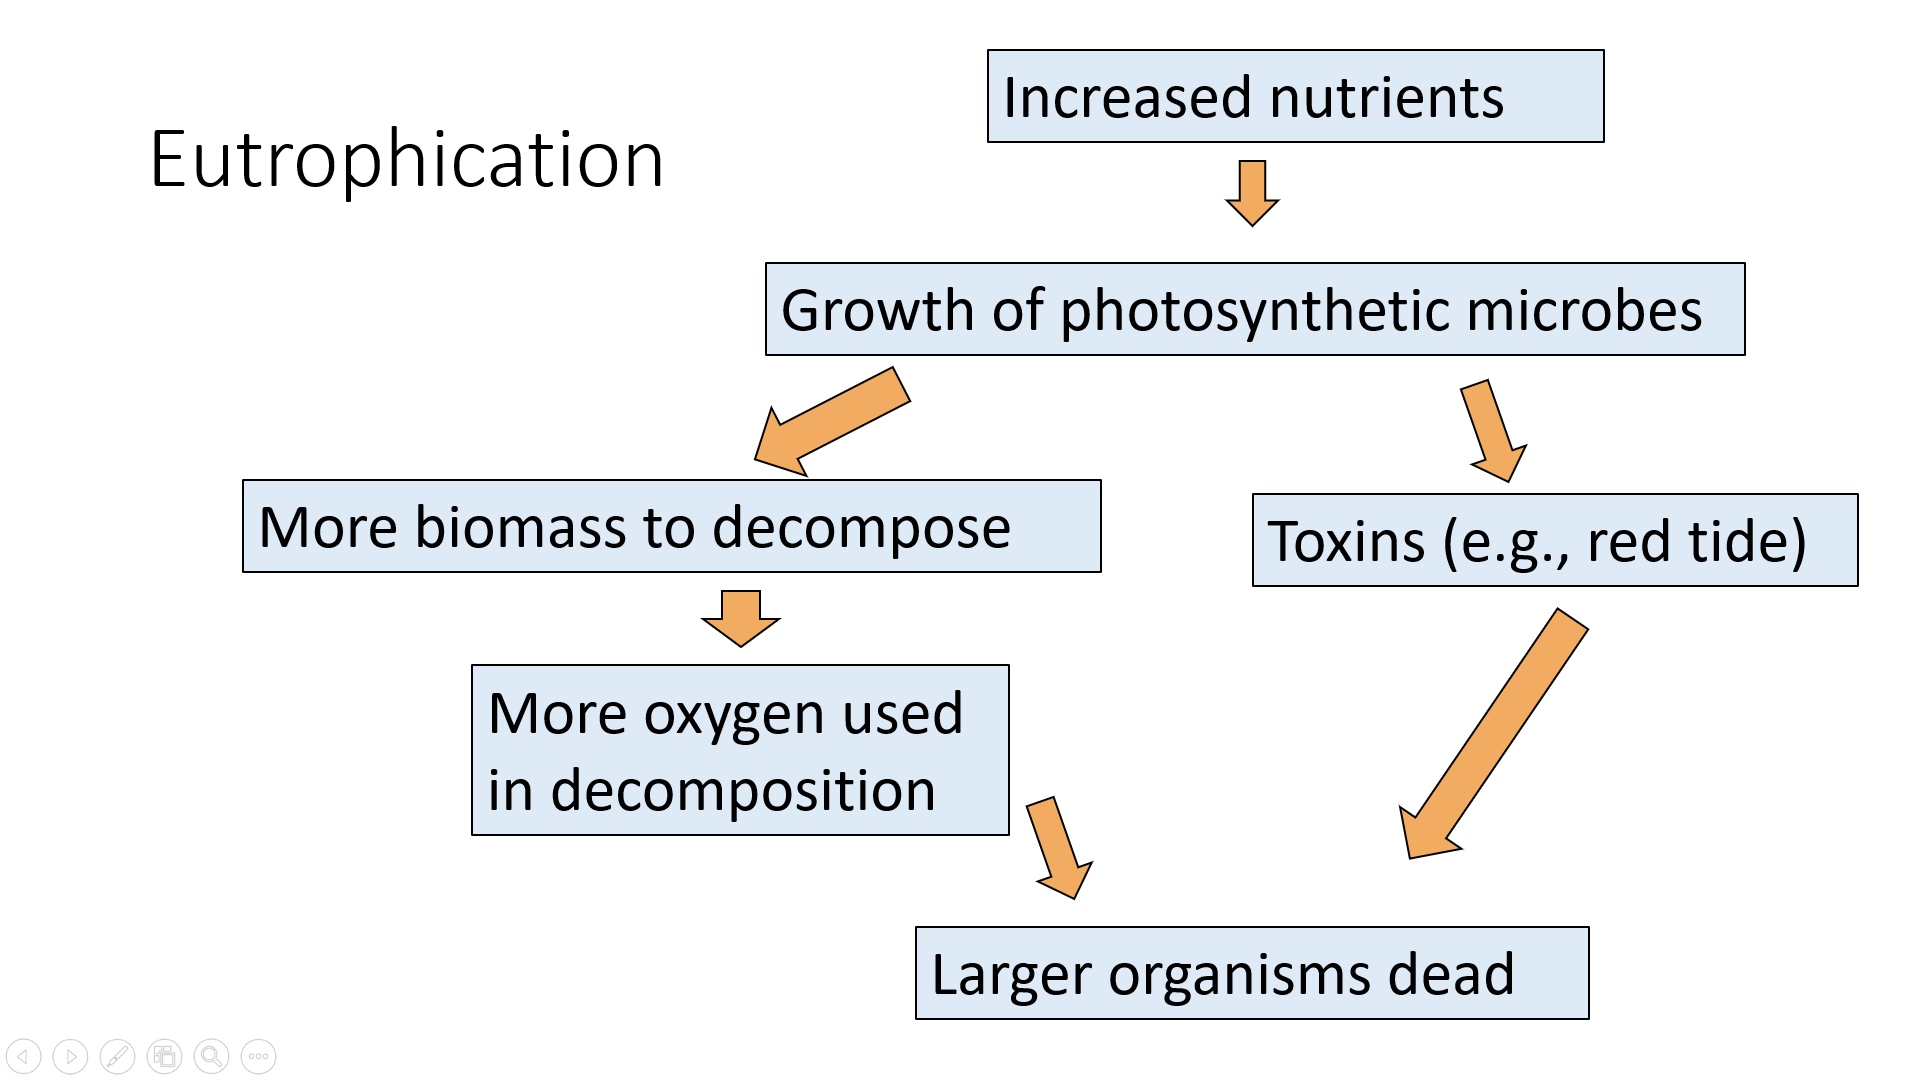 A flow chart of eutrophication.